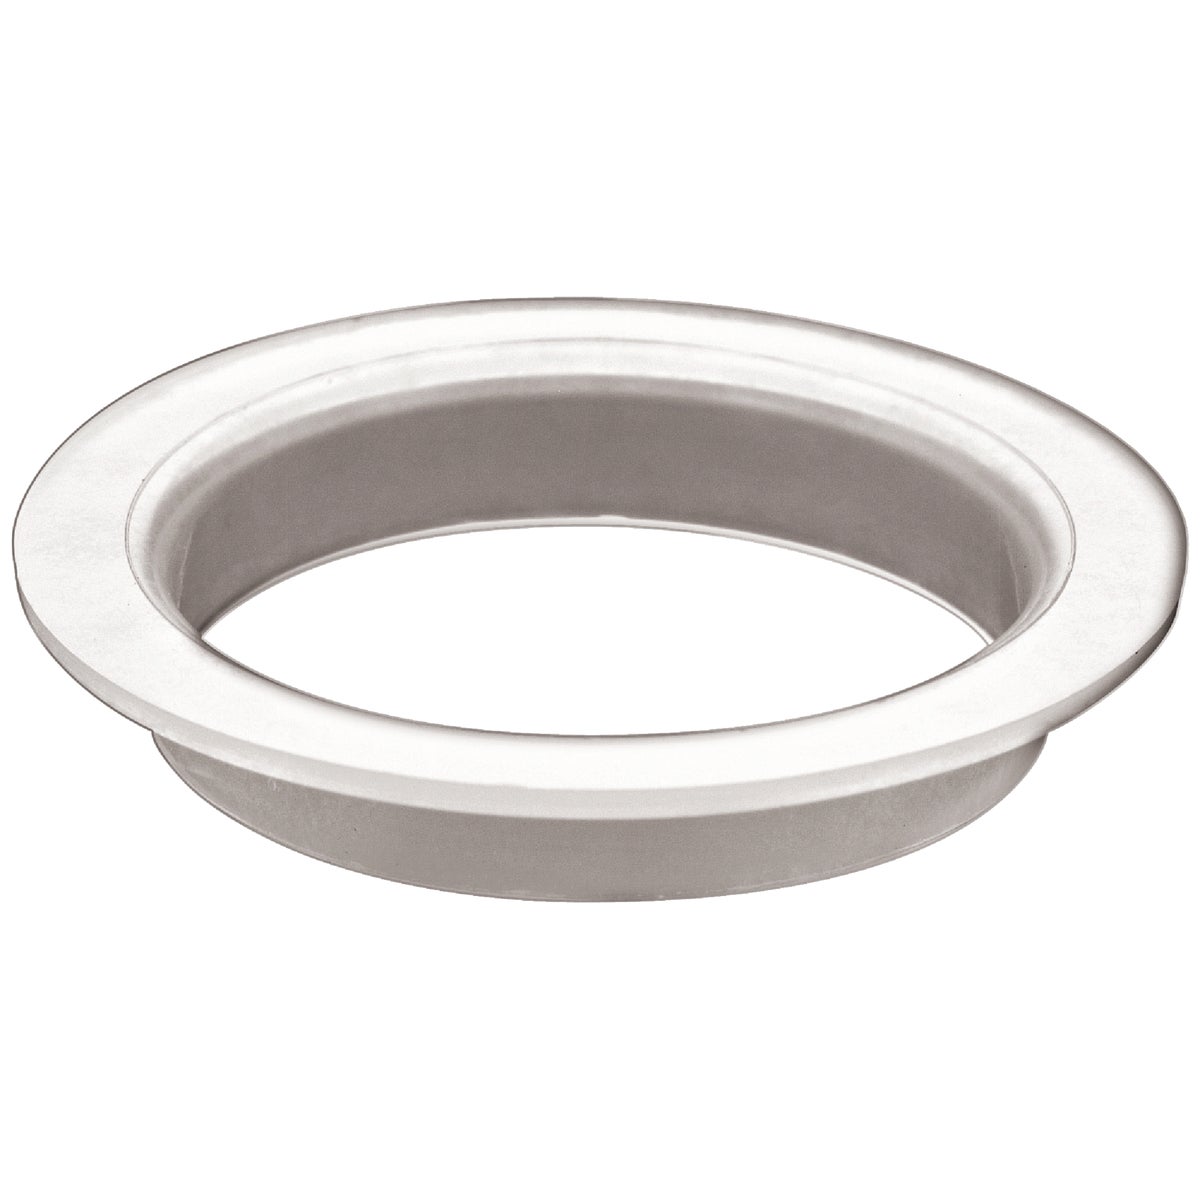 Item 443988, Tailpiece washer. 1-1/2".<br>
<br><b>No. DIB25515:</b> Strainer Size: 1-1/2 In., Pkg Qty: 1, Package Type: Bag